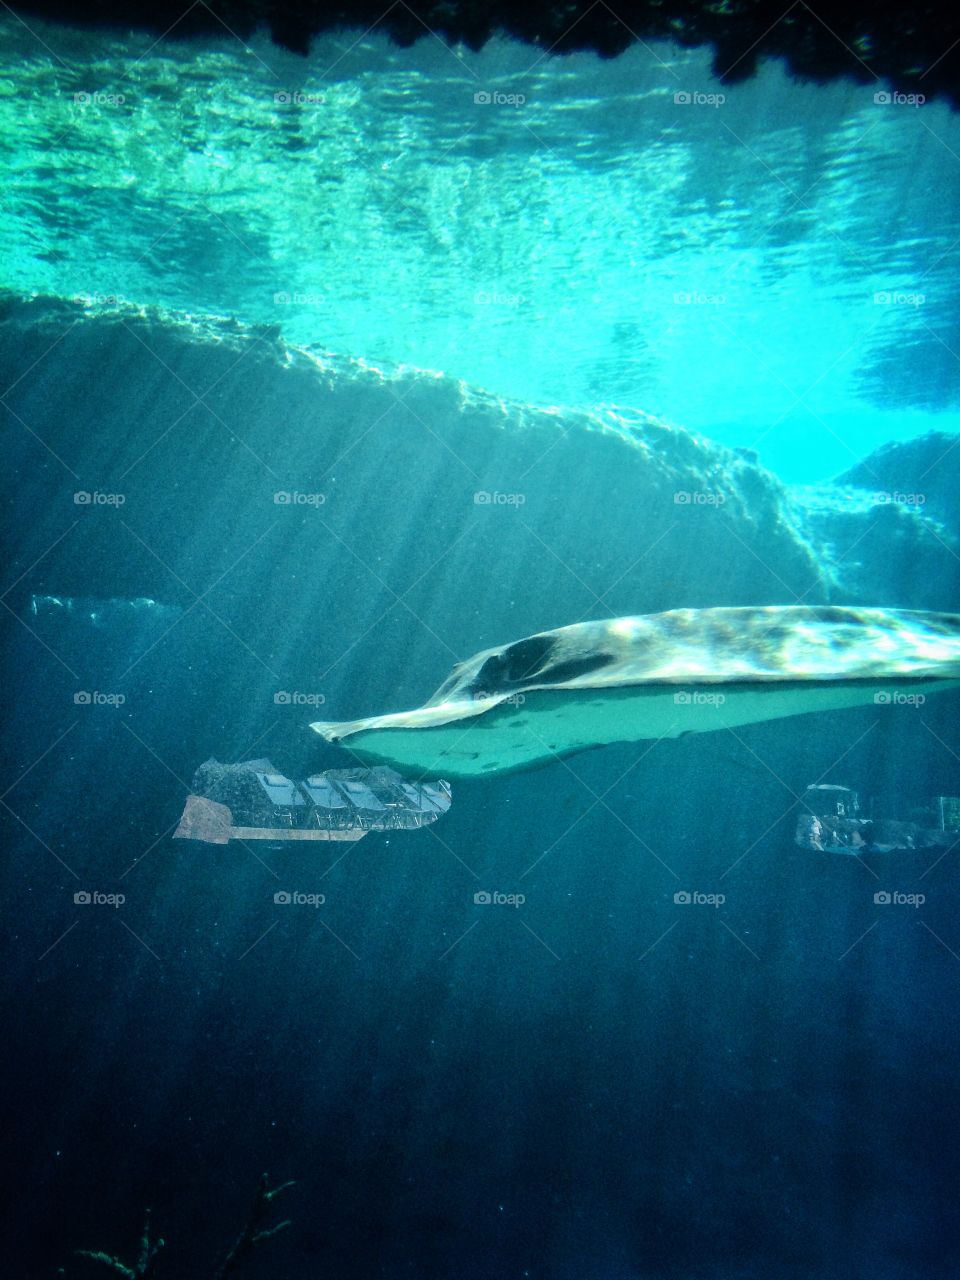 "Beneath the waves into the depths of Atlantis is where I roam"

Sting ray in Atlantis Bahamas
During Christmas vacation